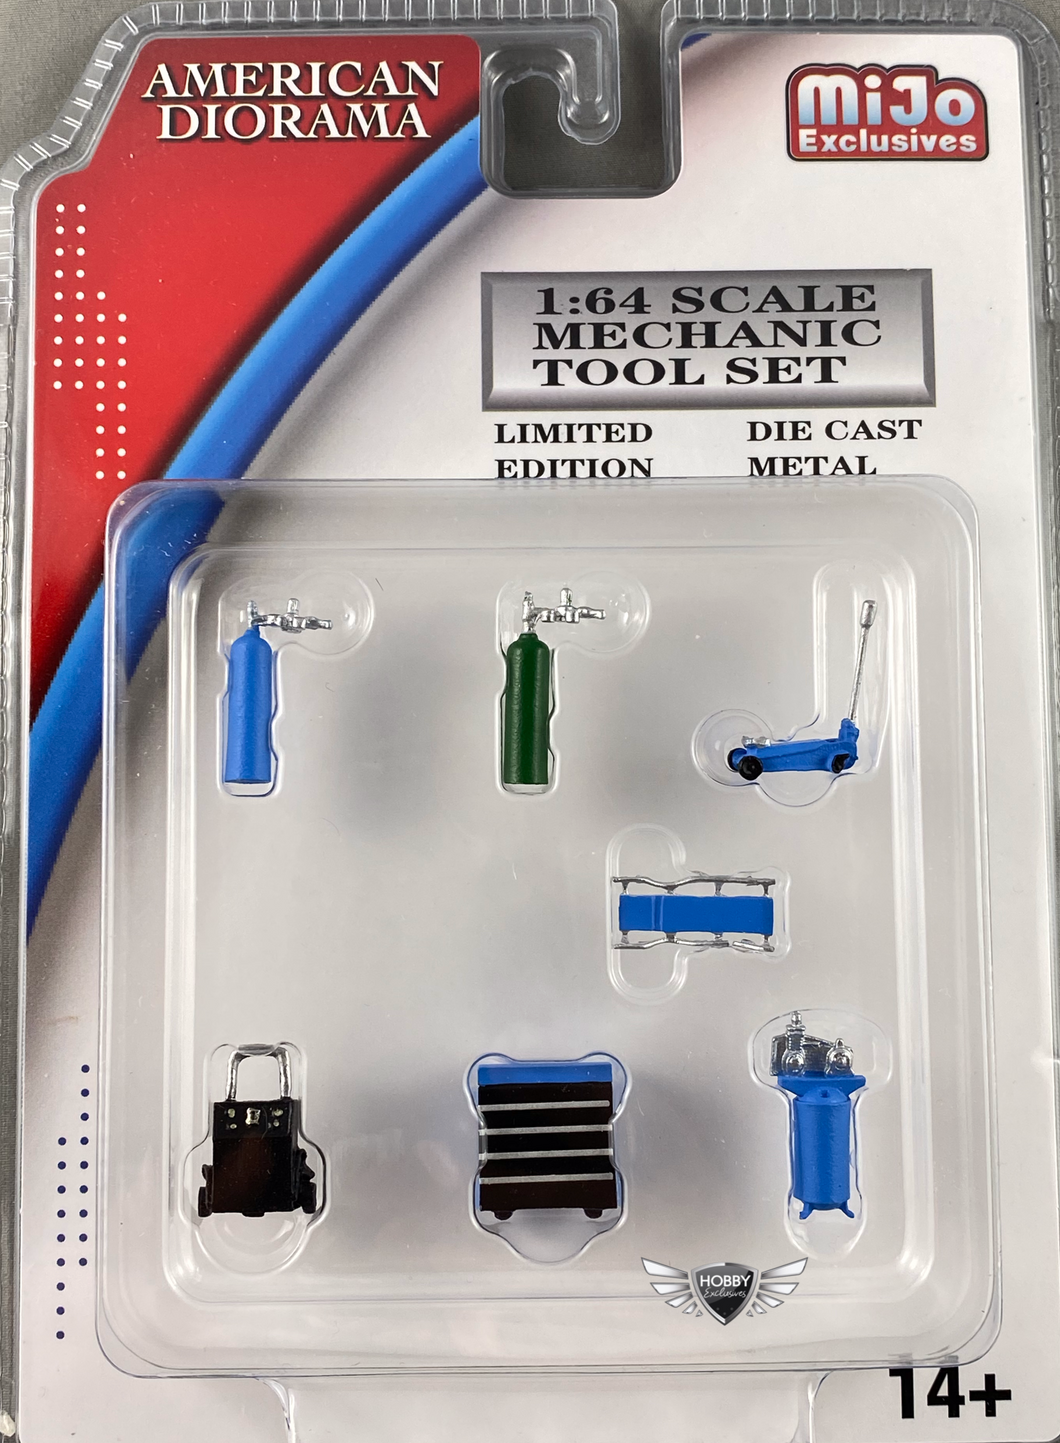 1:64 Scale Mechanic Tool 7 Pieces Set MiJo Exclusives AMERICAN DIORAMA BLUE